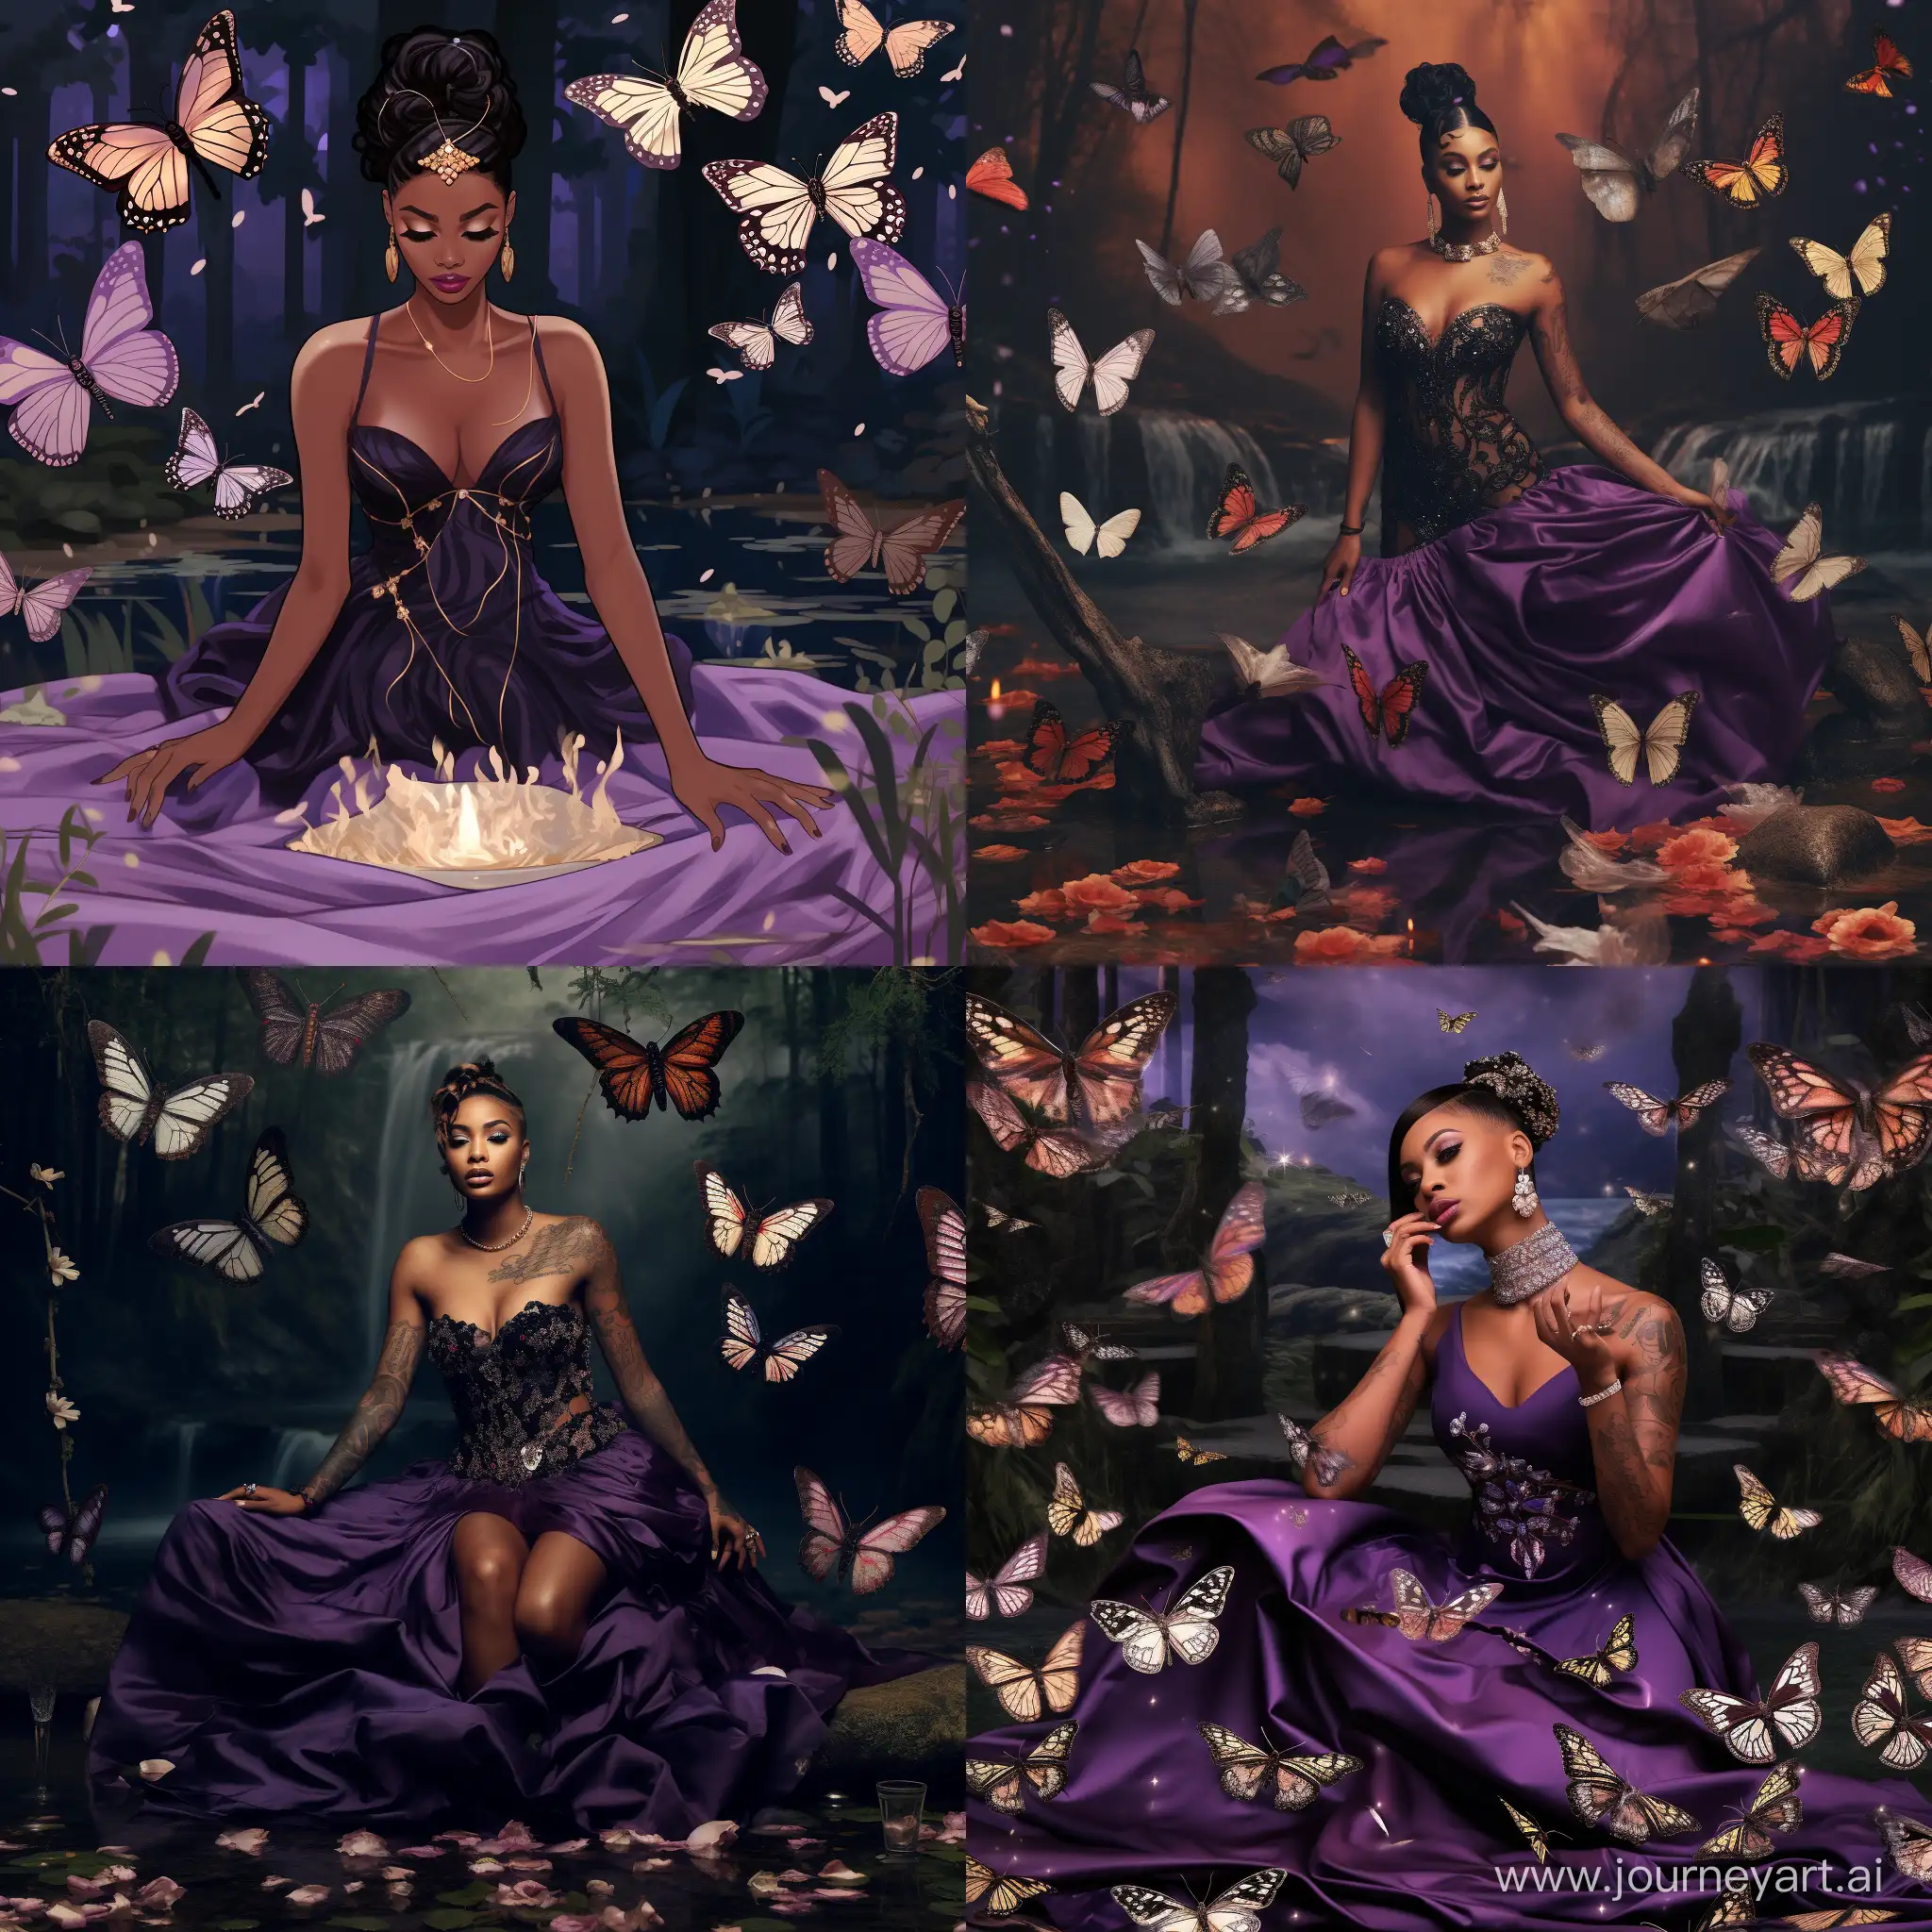 /imagine prompt  create chic image of scene with a black woman exuding style in a chignon, tattoos, and fine gold jewelry. she wears a deep purple butterfly dress with bedazzled white petticoat. in an enchanted forest. lots of butterflies, a pool of water with swans, showing full length. all blinged out